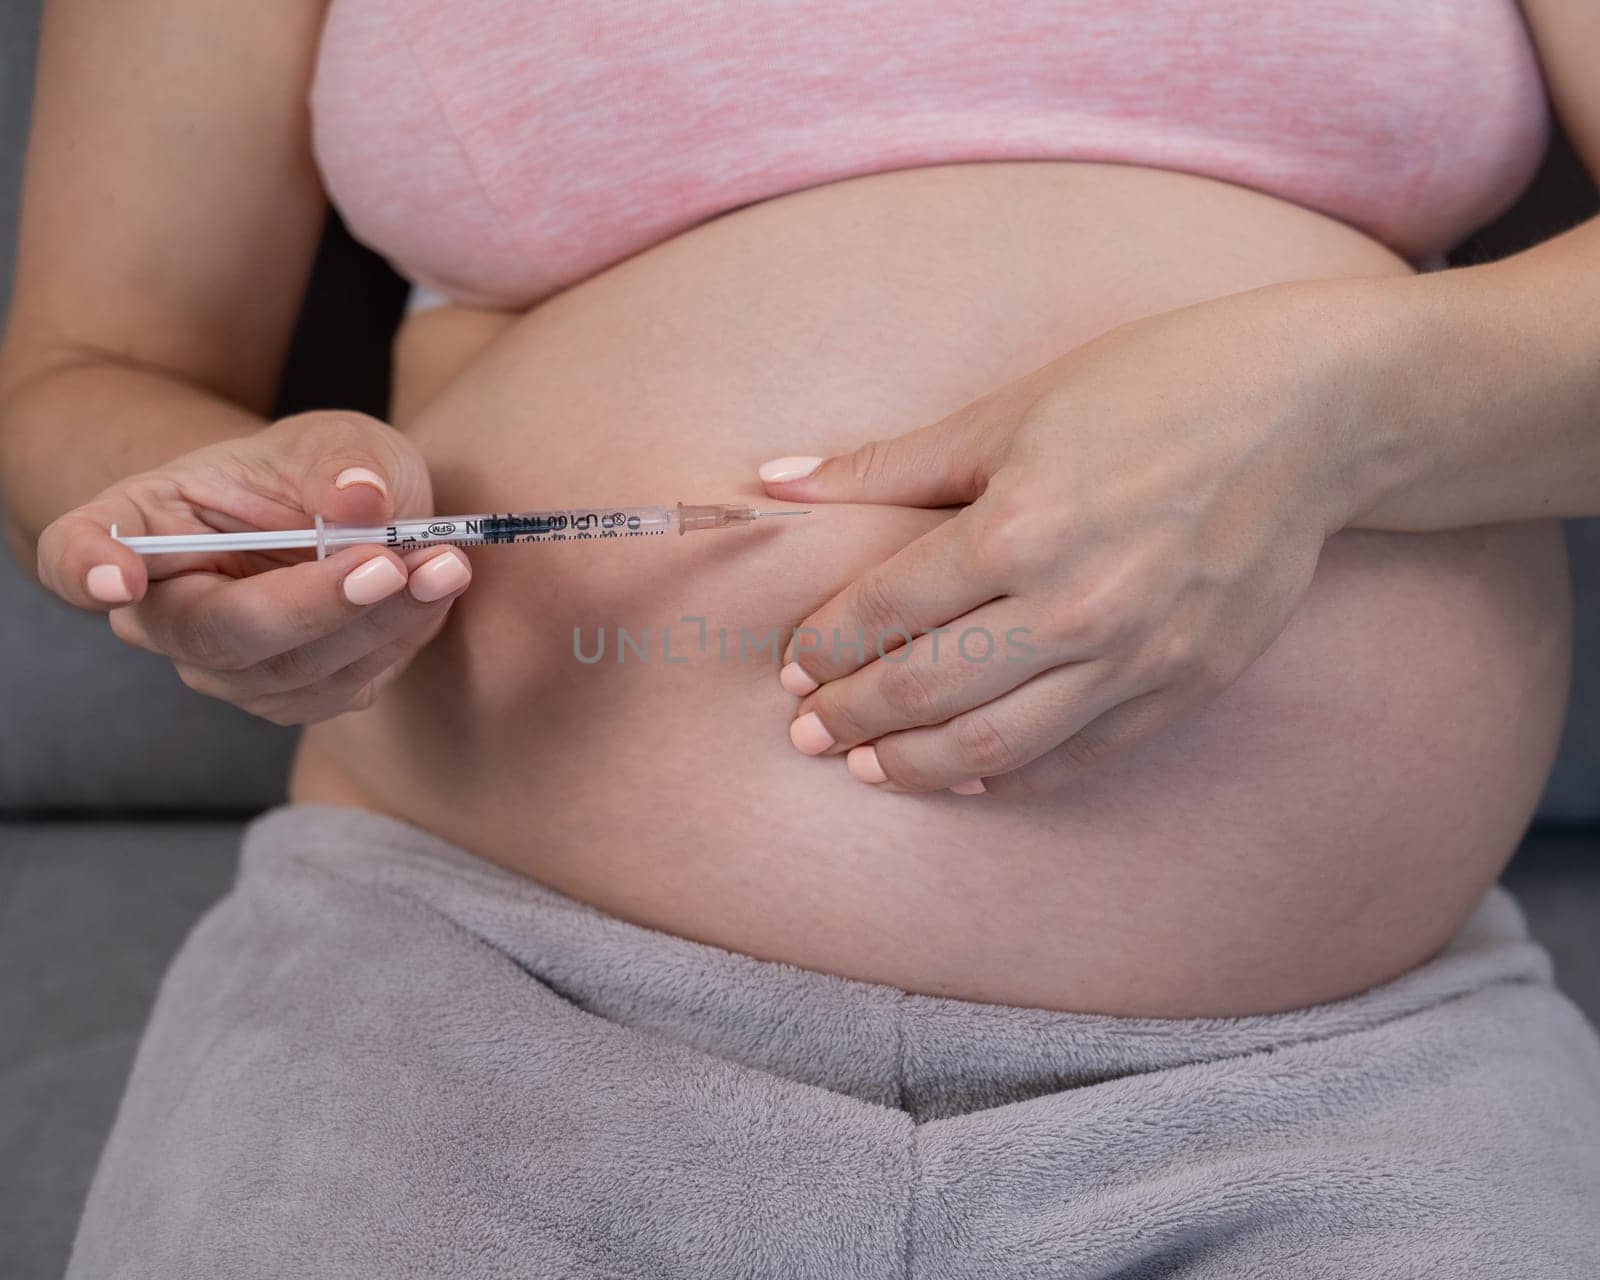 A pregnant woman puts an injection of insulin while sitting on the couch. Close up of the belly. by mrwed54